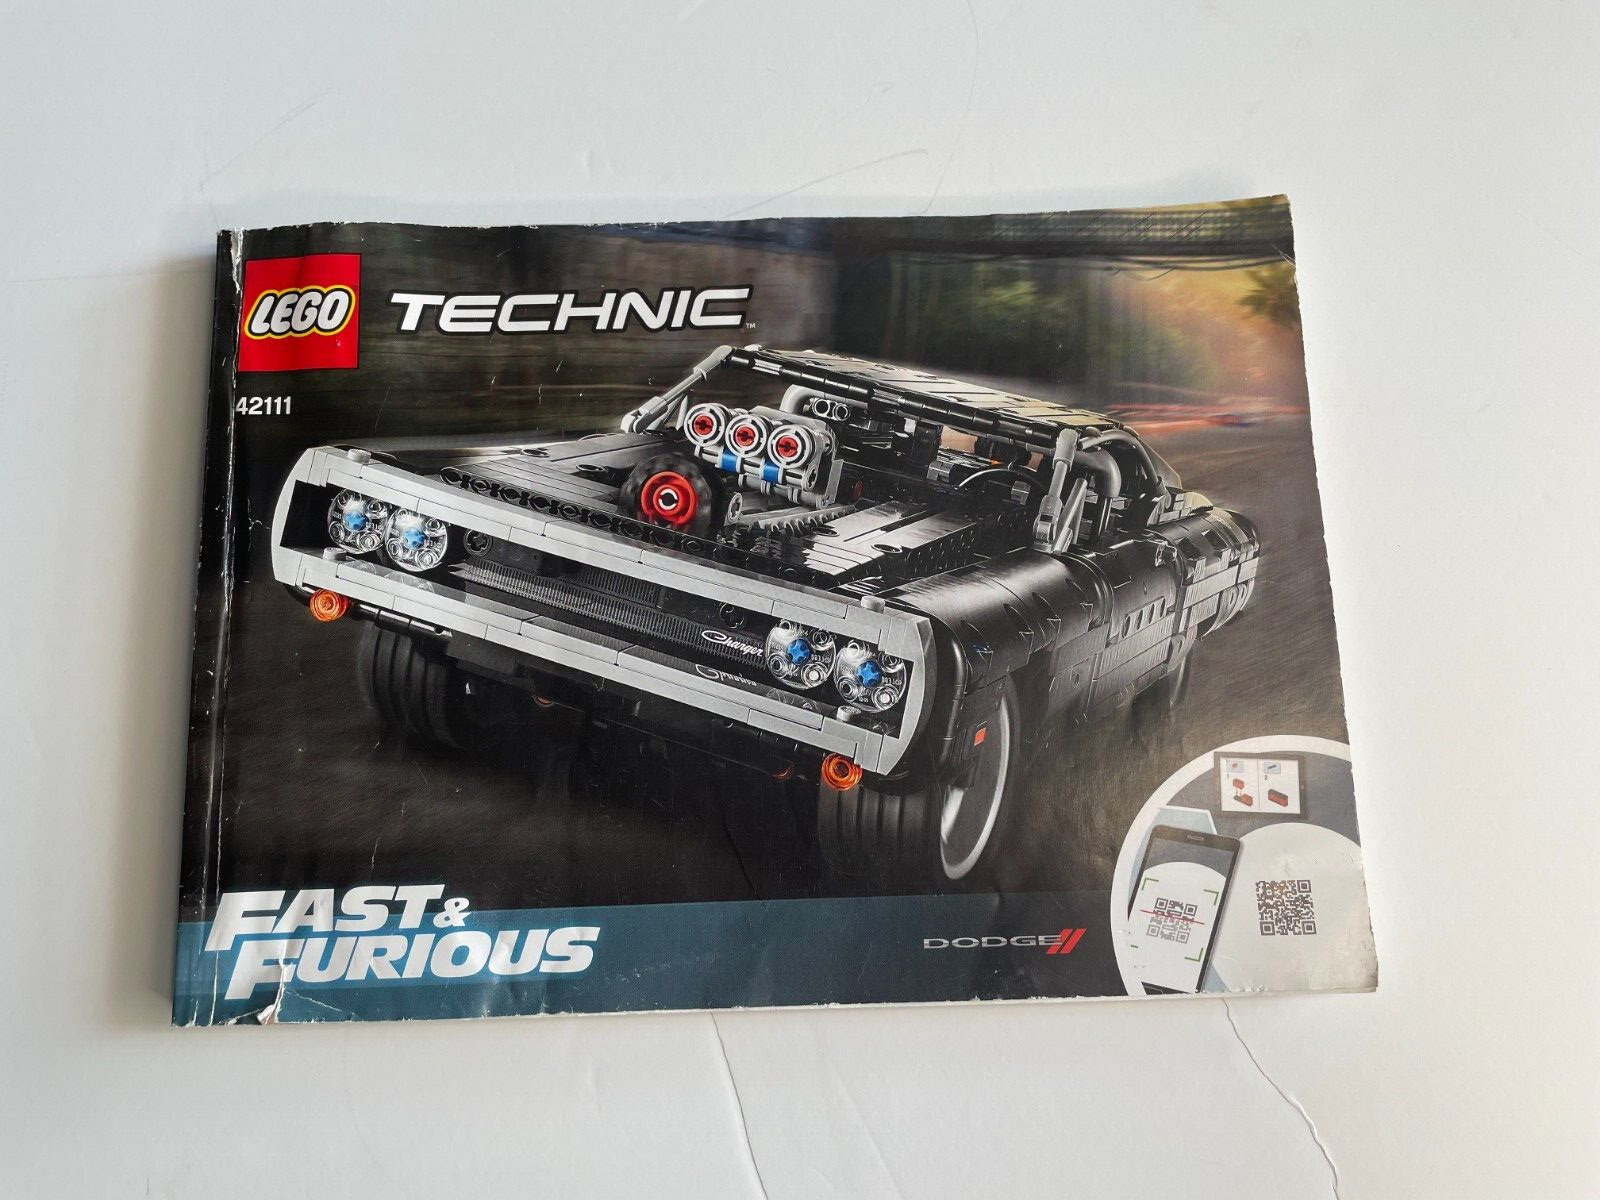 LEGO Technic Fast & Furious Dom's Dodge Charger 42111 Instruction Manual